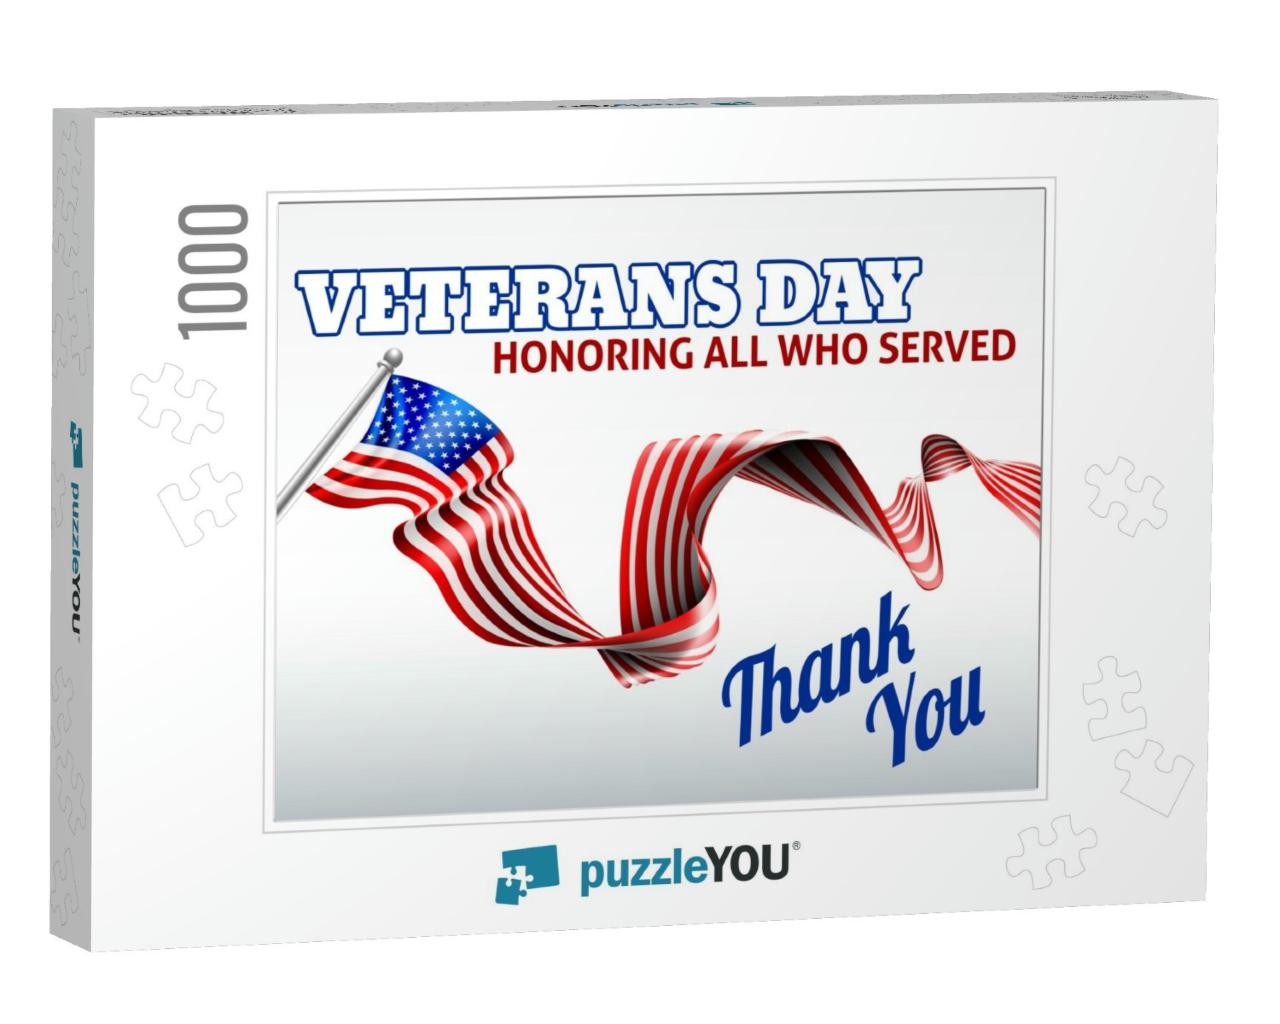 A Veterans Day American Flag Ribbon Background Des... Jigsaw Puzzle with 1000 pieces